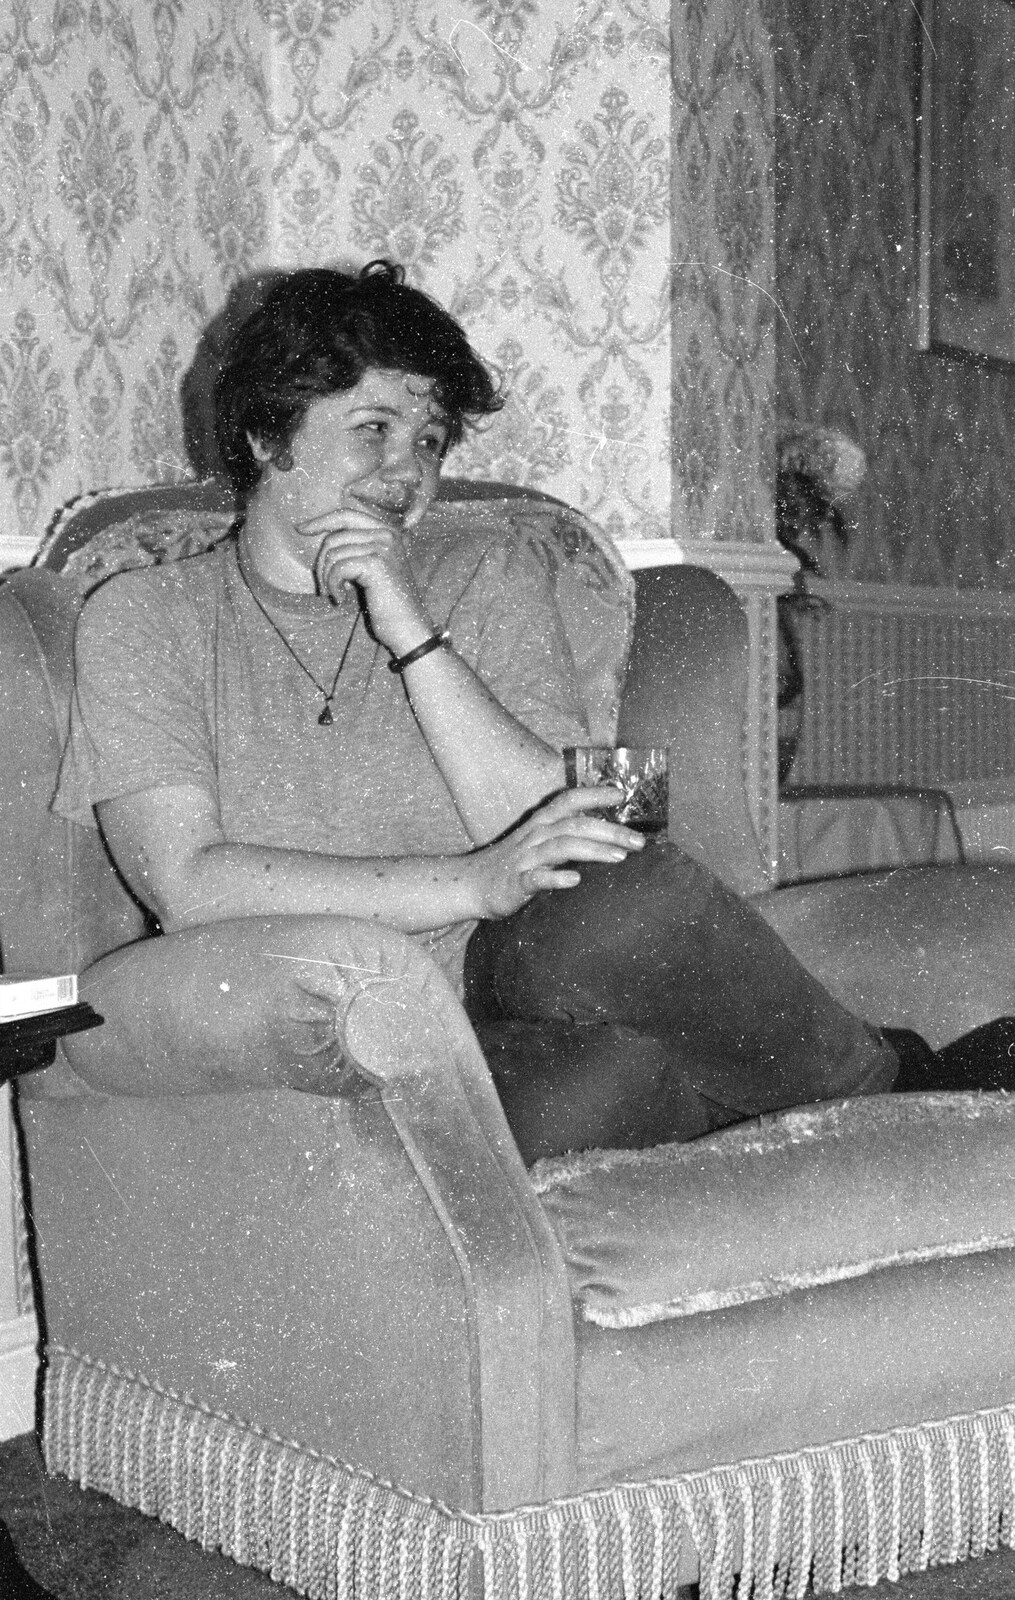 A Black and White Life in Concrete, Stuston, Suffolk - 3rd September 1992: Sis in the Old Man's lounge